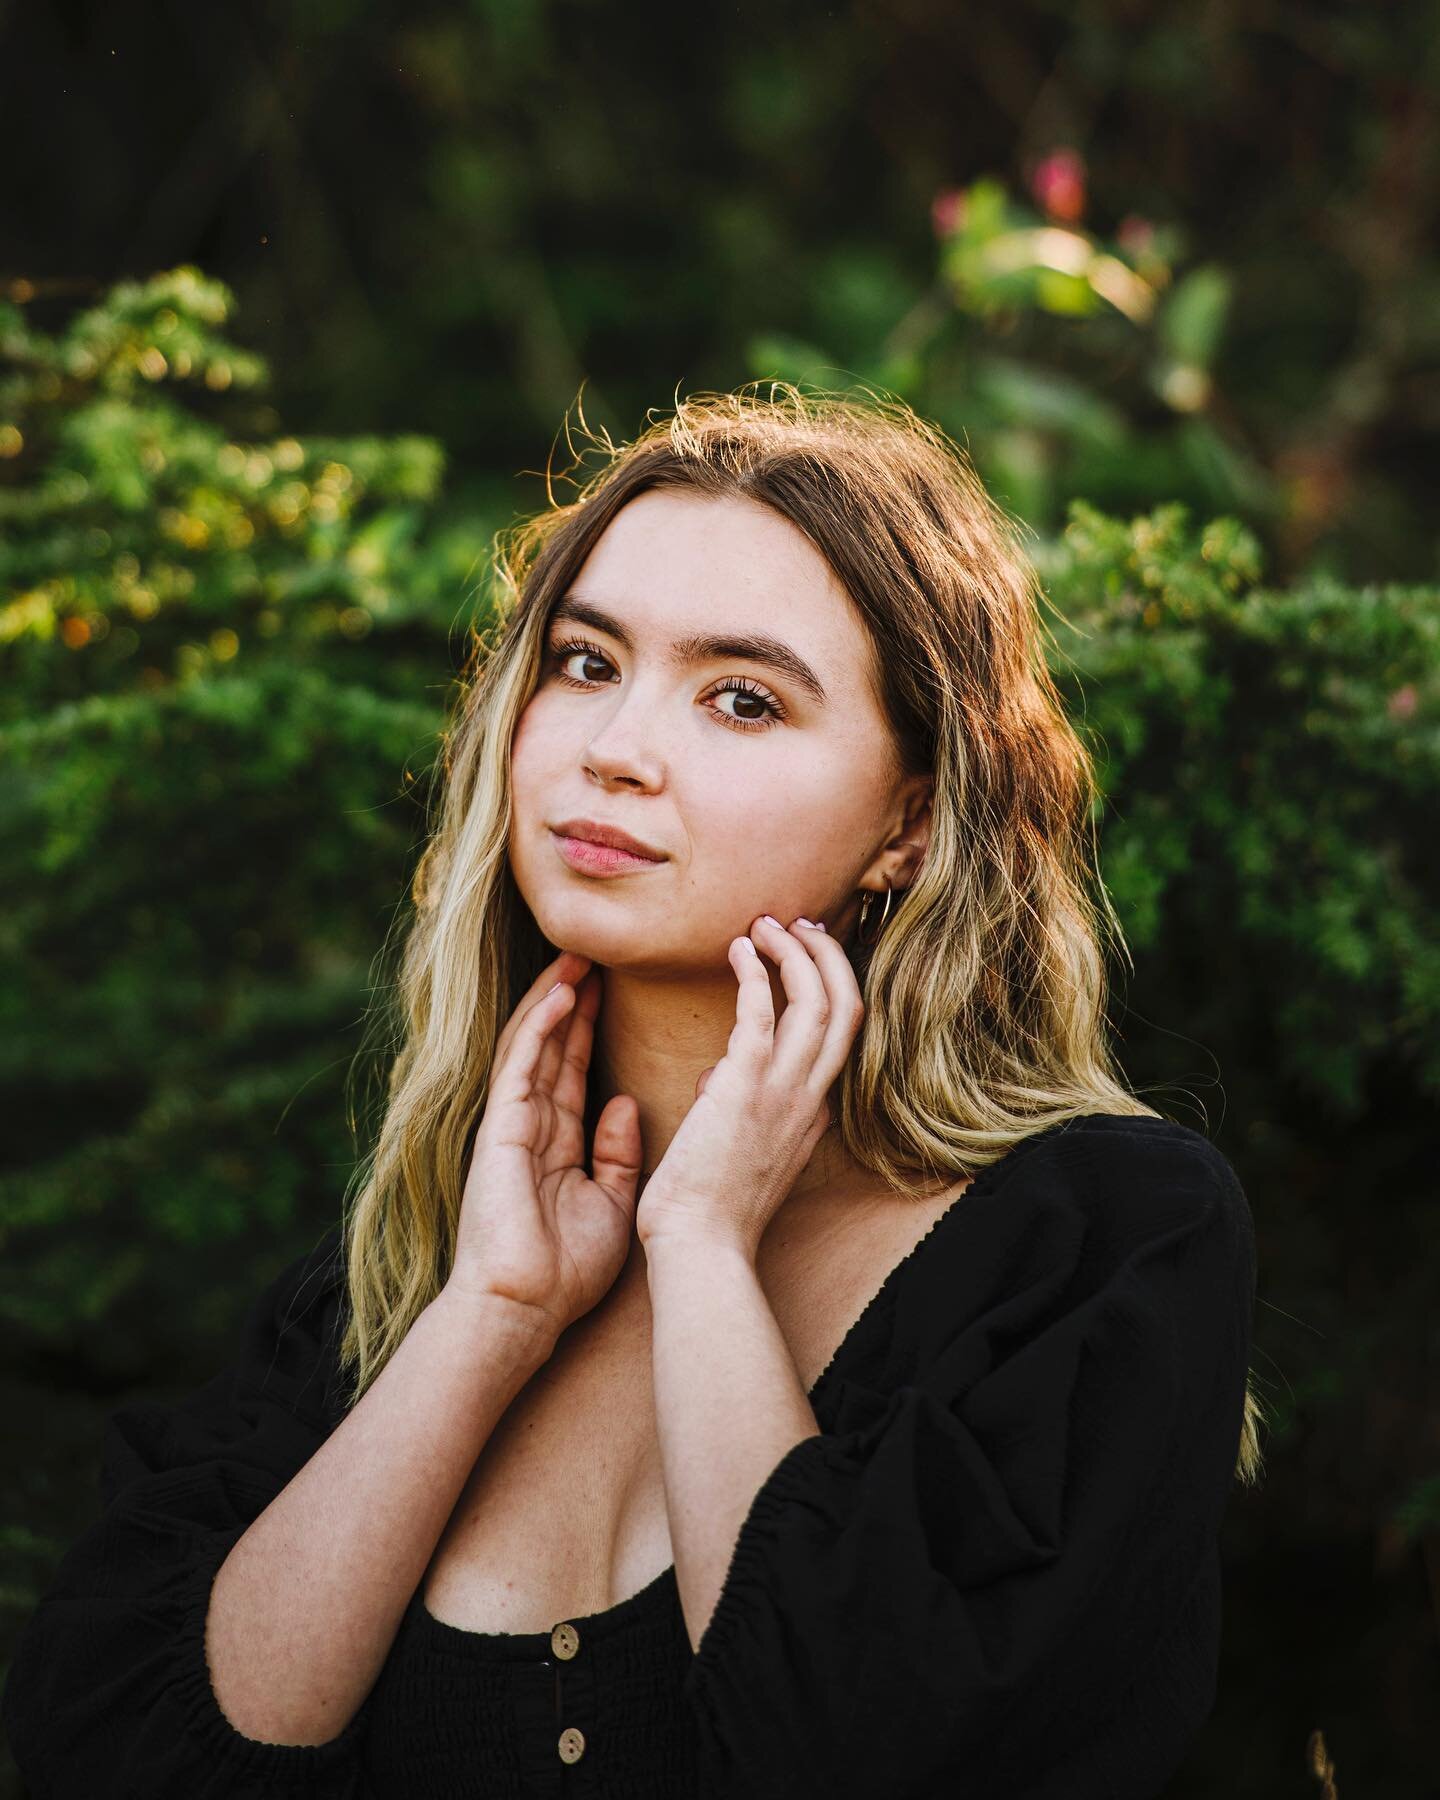 Miya senior portraits. Her family owns a cabin here in Port Townsend and she&rsquo;s been visiting every summer for all her life. For her senior portraits we utilized much of what is so beautiful here. In the midst of wedding season, senior portraits